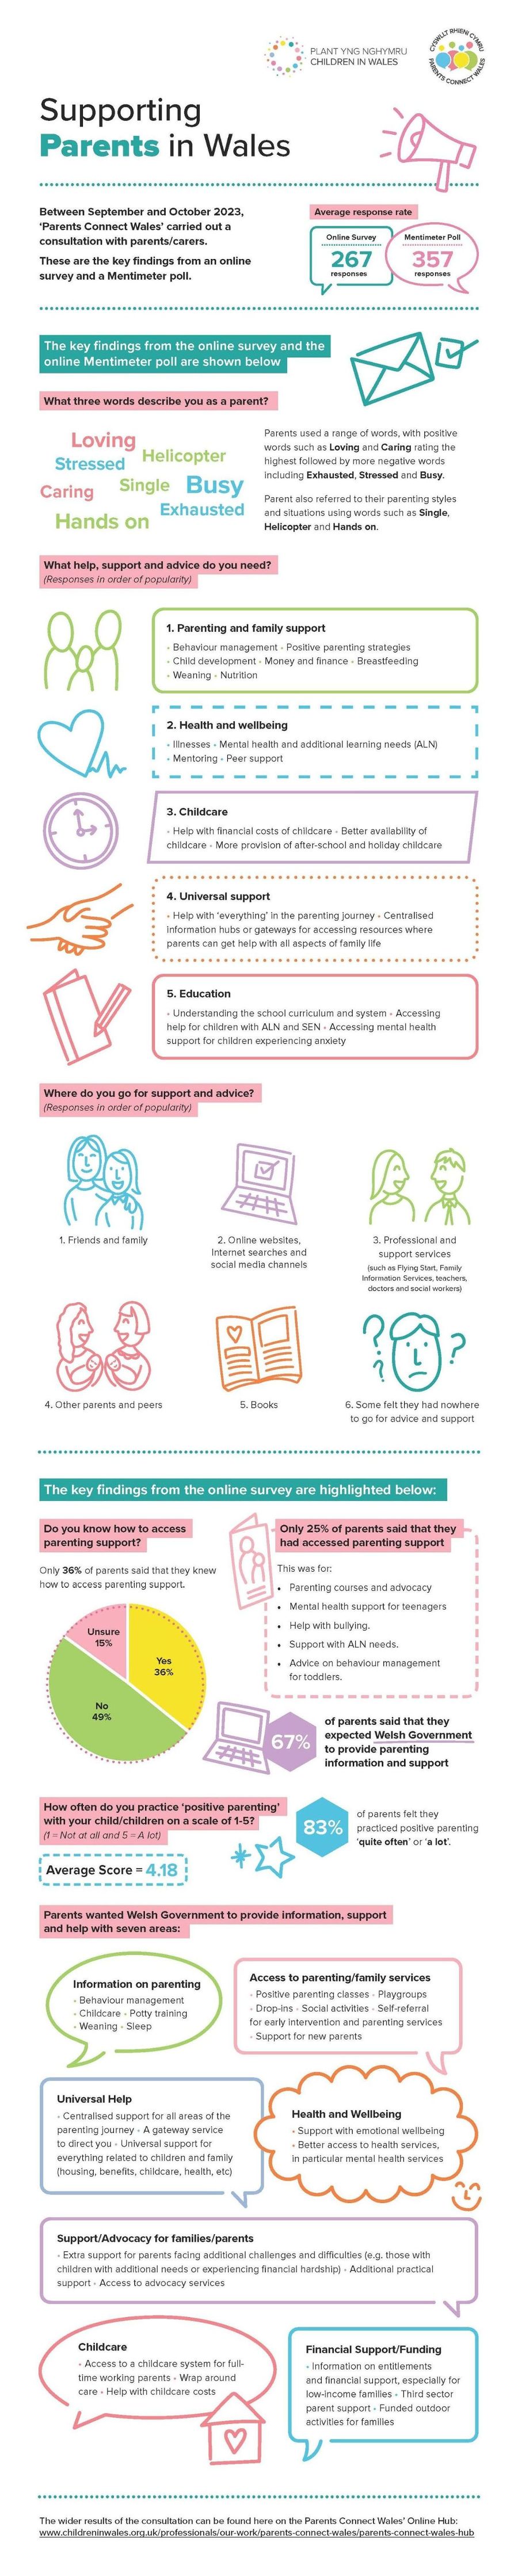 Children_in_Wales_Supporting_Parents_in_Wales_infographic_V3.jpg